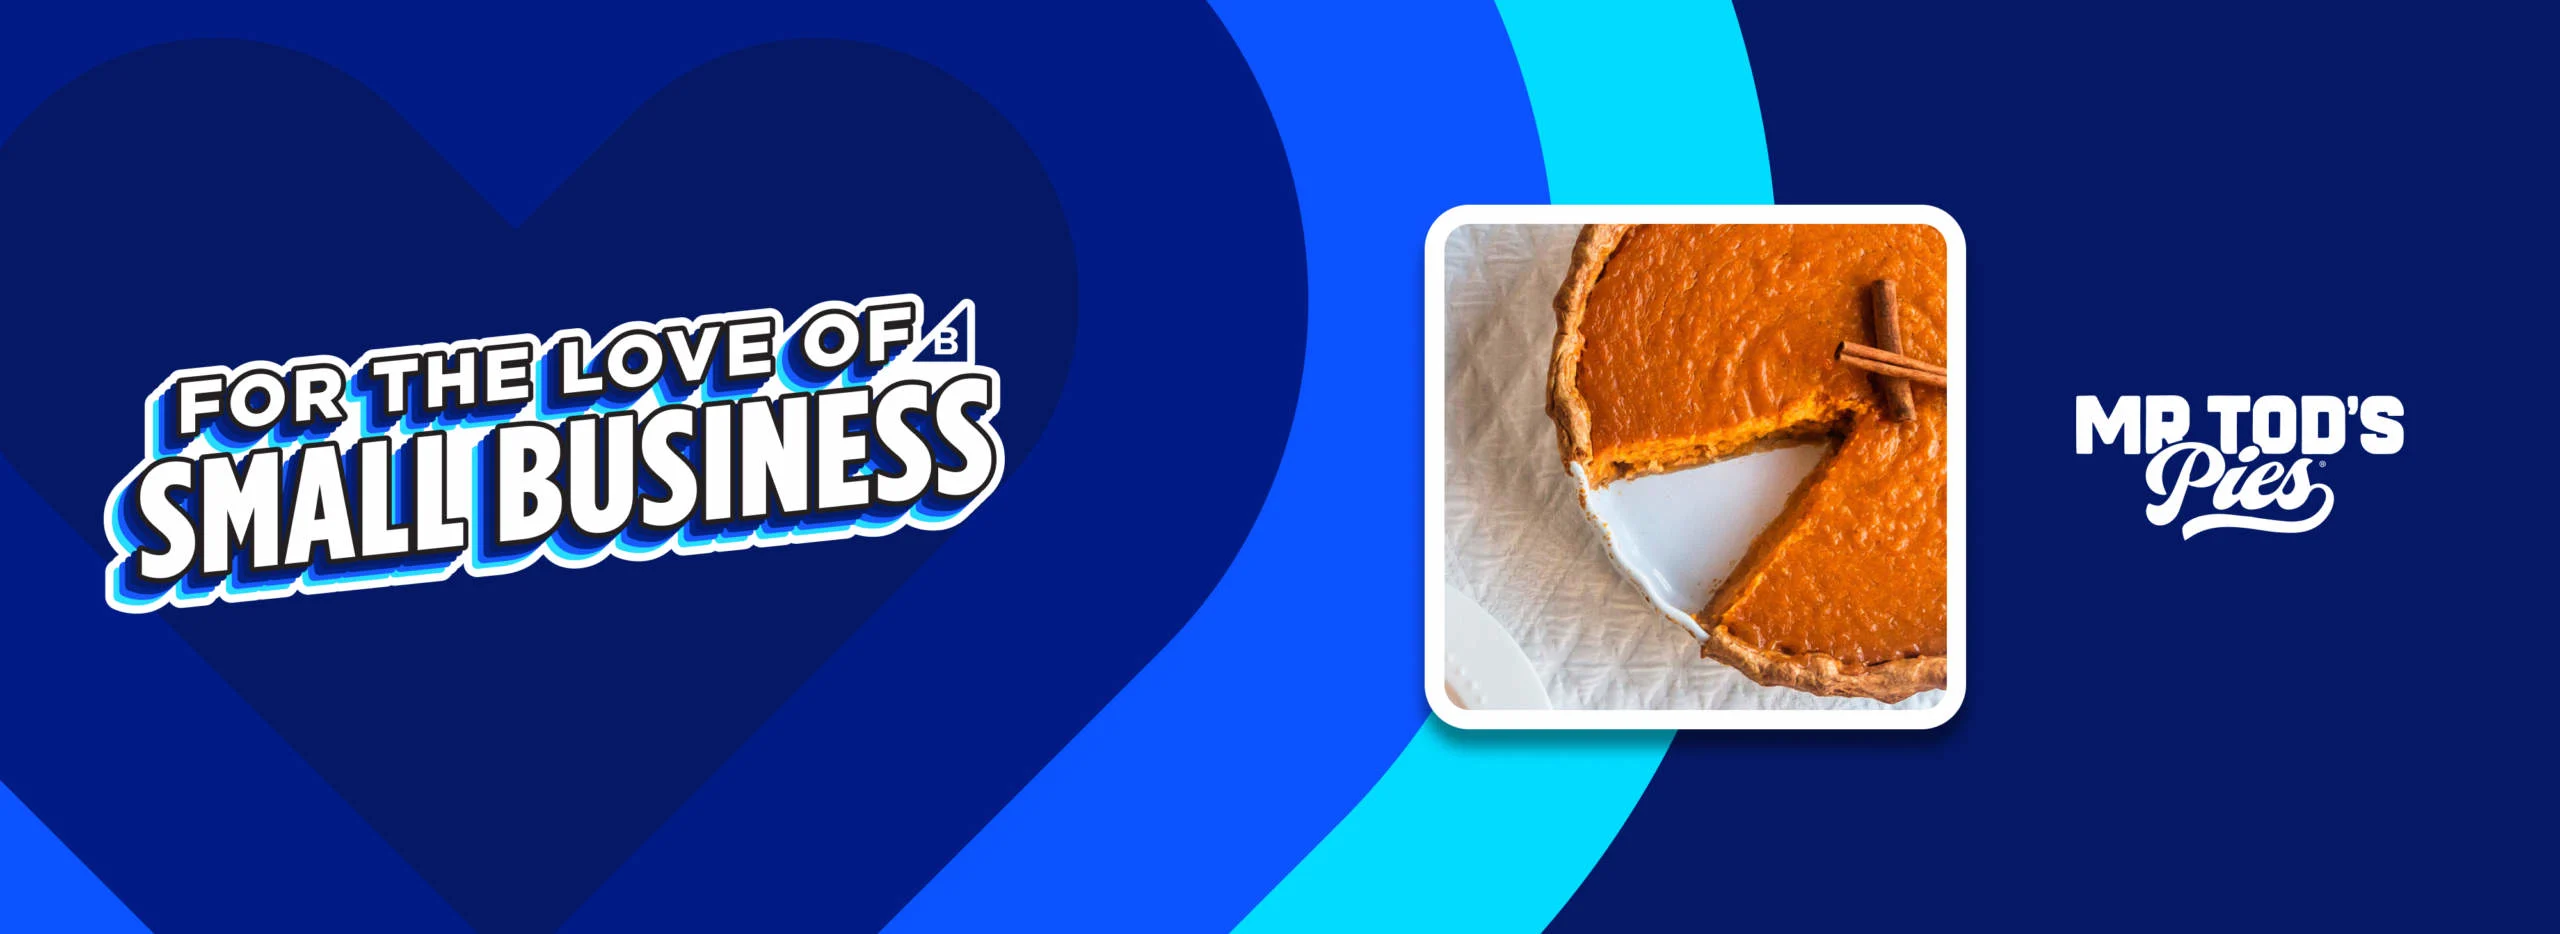 https://cms-wp.bigcommerce.com/wp-content/uploads/2022/11/blog-header-for-the-love-mr-tods-pies-scaled.jpg